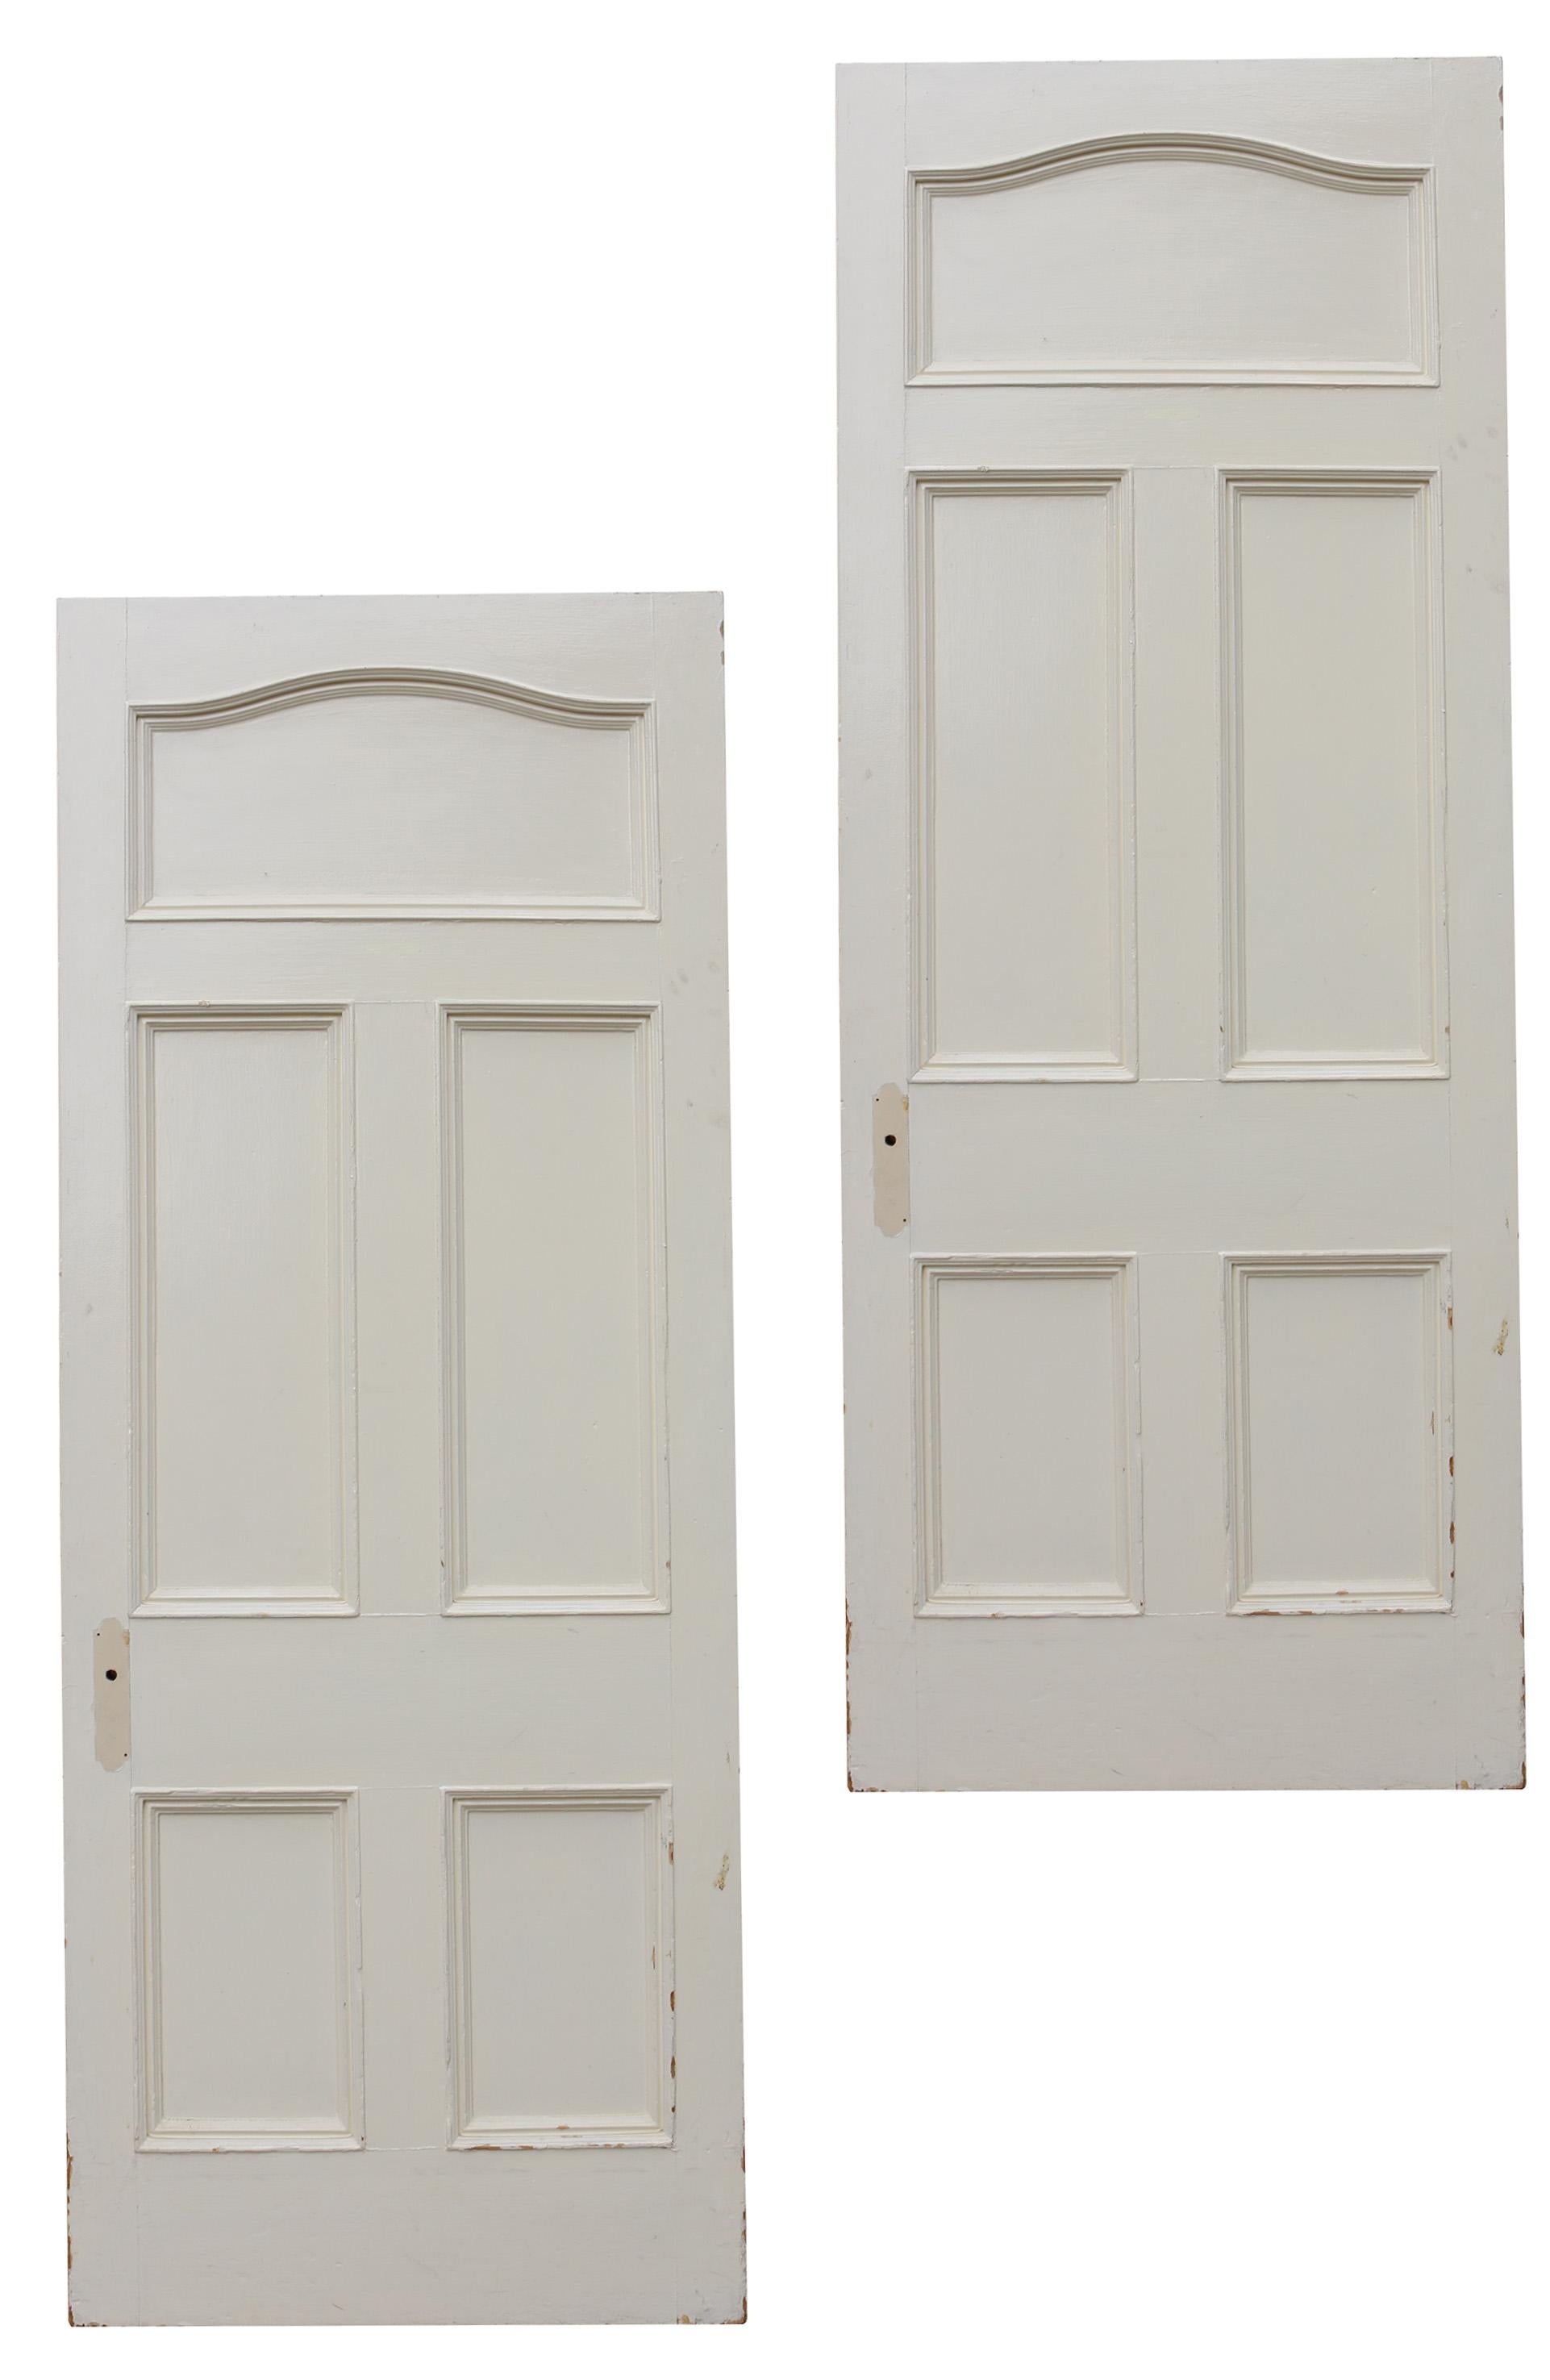 Set of Antique Painted Pine Doors '96 Available' In Good Condition For Sale In Wormelow, Herefordshire